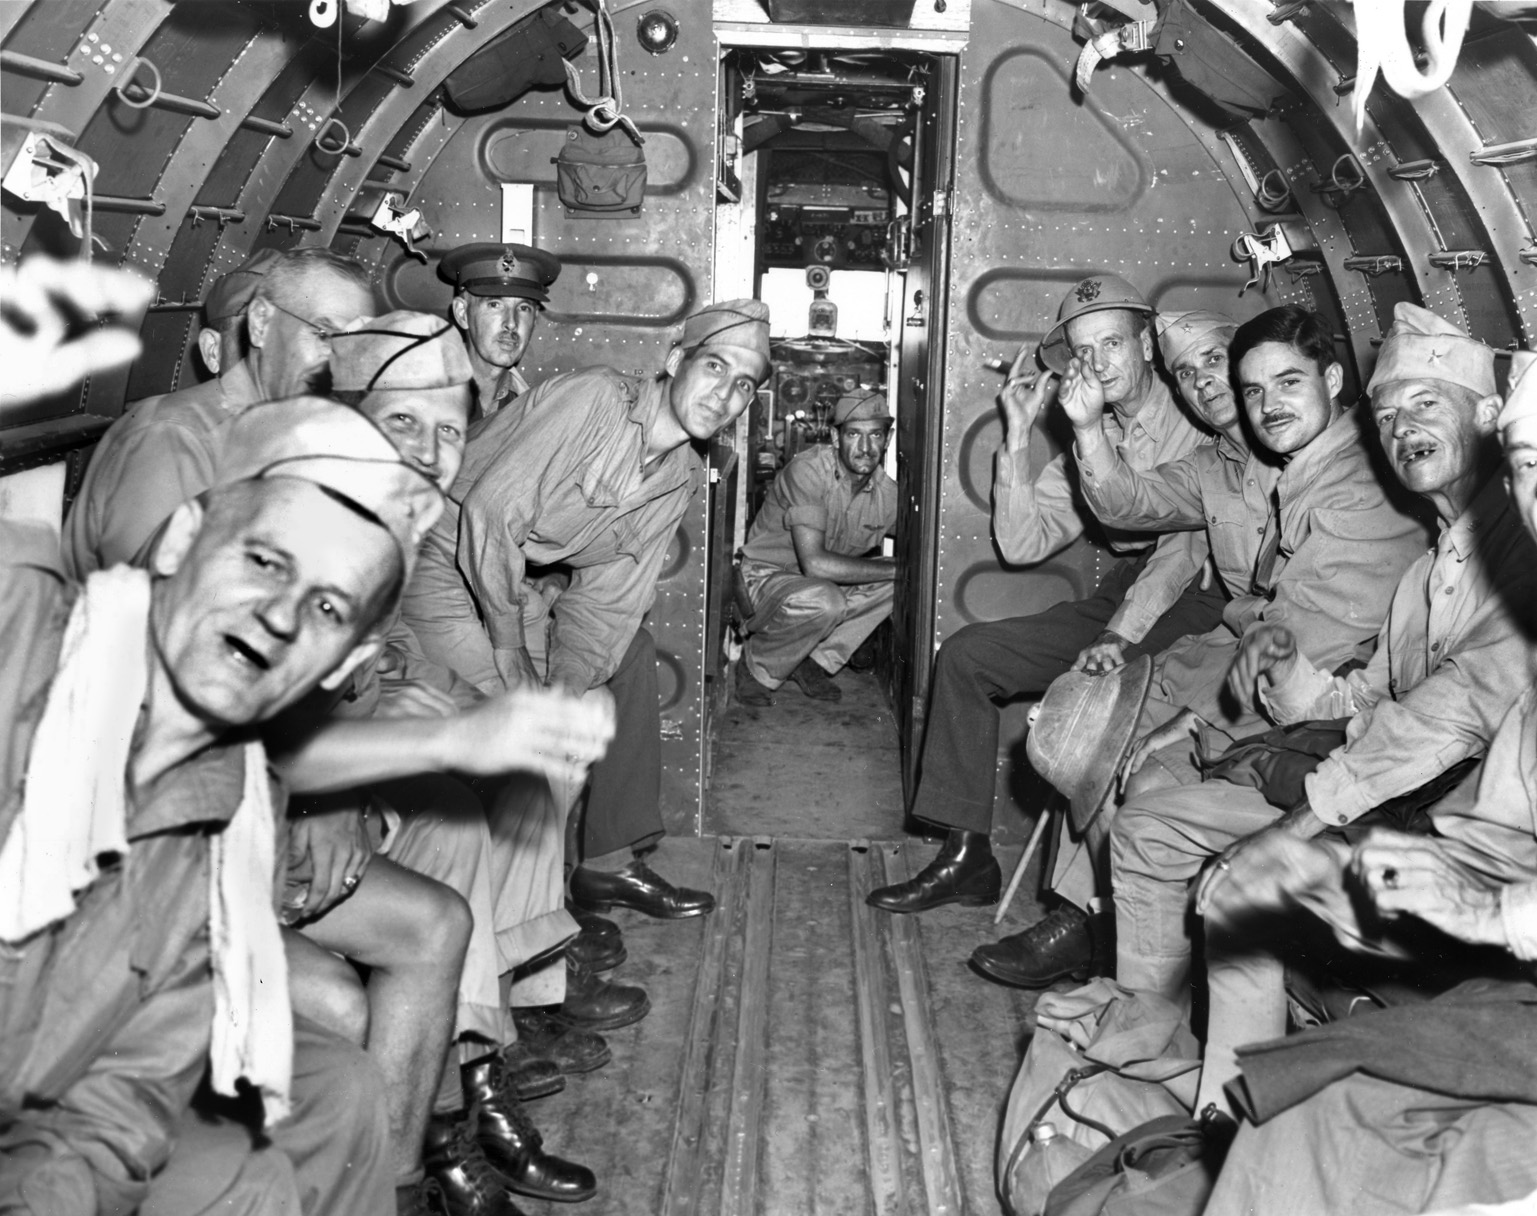 Their ordeal at last over, freed prisoners prepare to fly out of Mukden. British General Arthur Percival sits rear left, Wainright, rear right. 